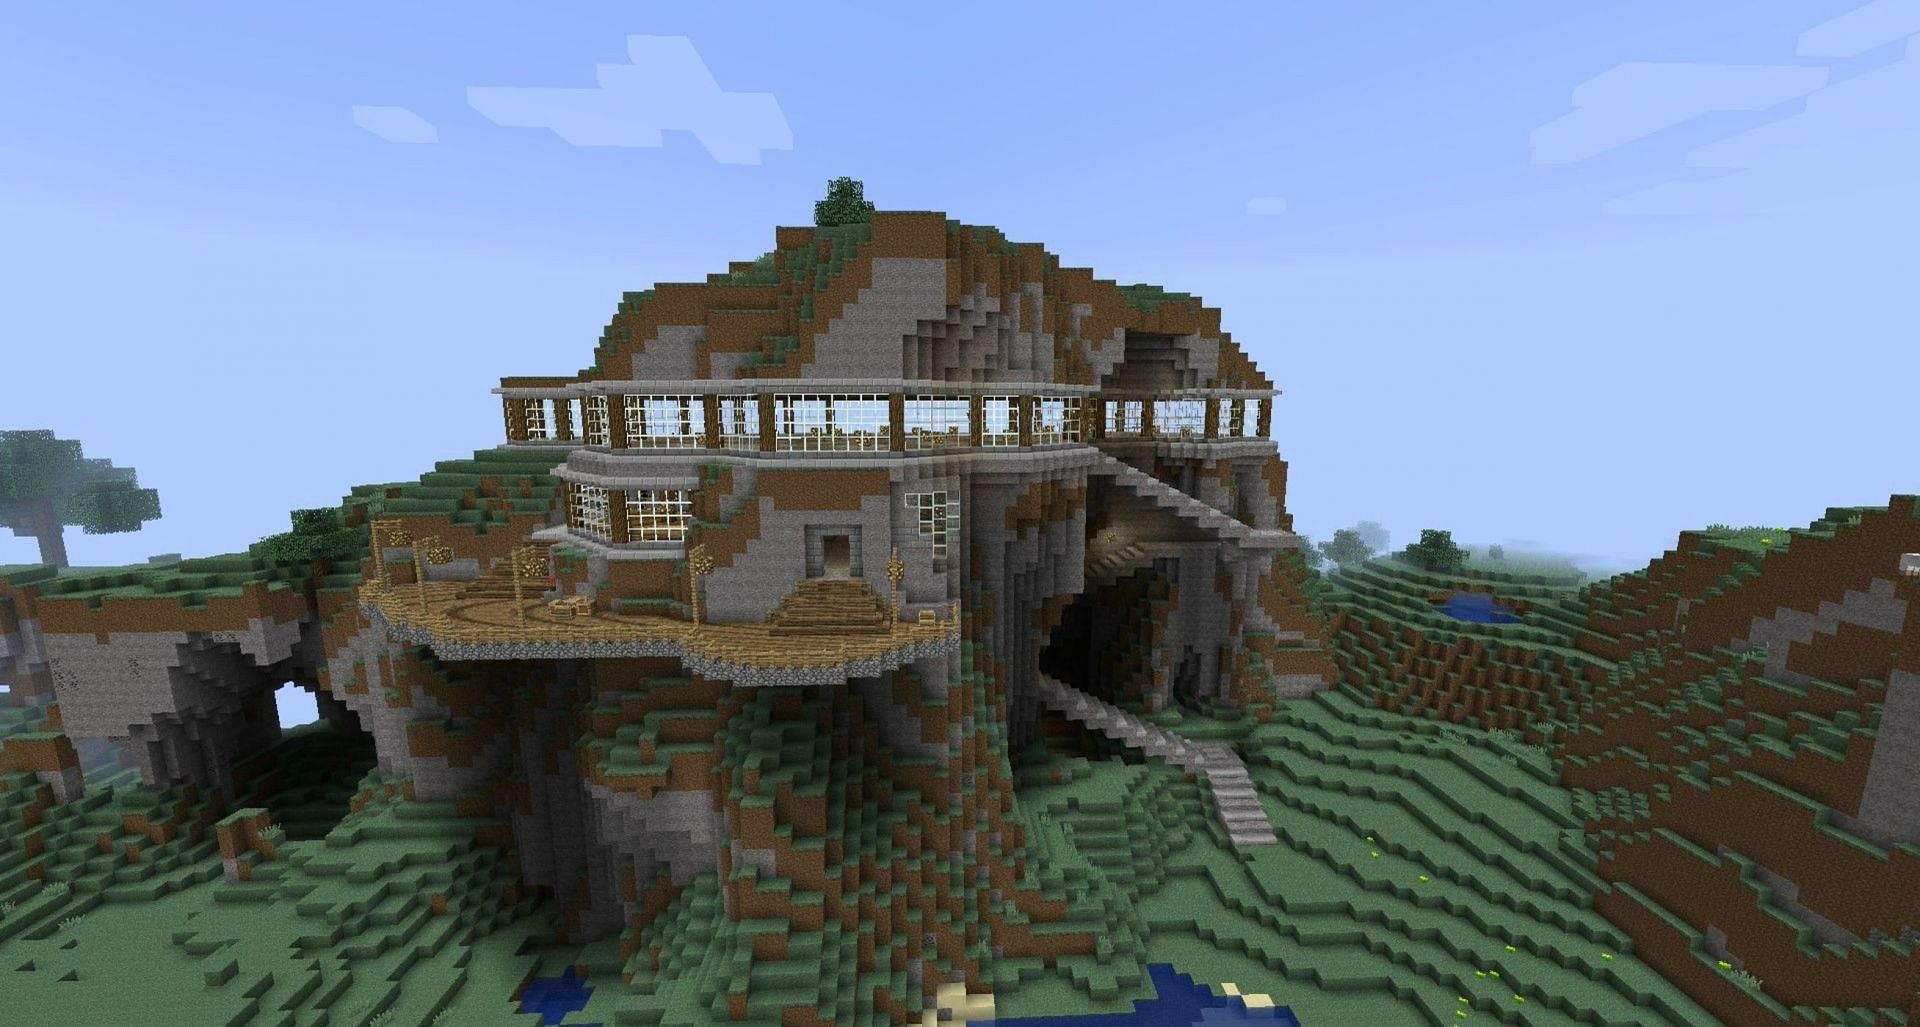 House in a mountain = best house : Minecraft  Cute minecraft houses,  Minecraft houses, Minecraft blueprints